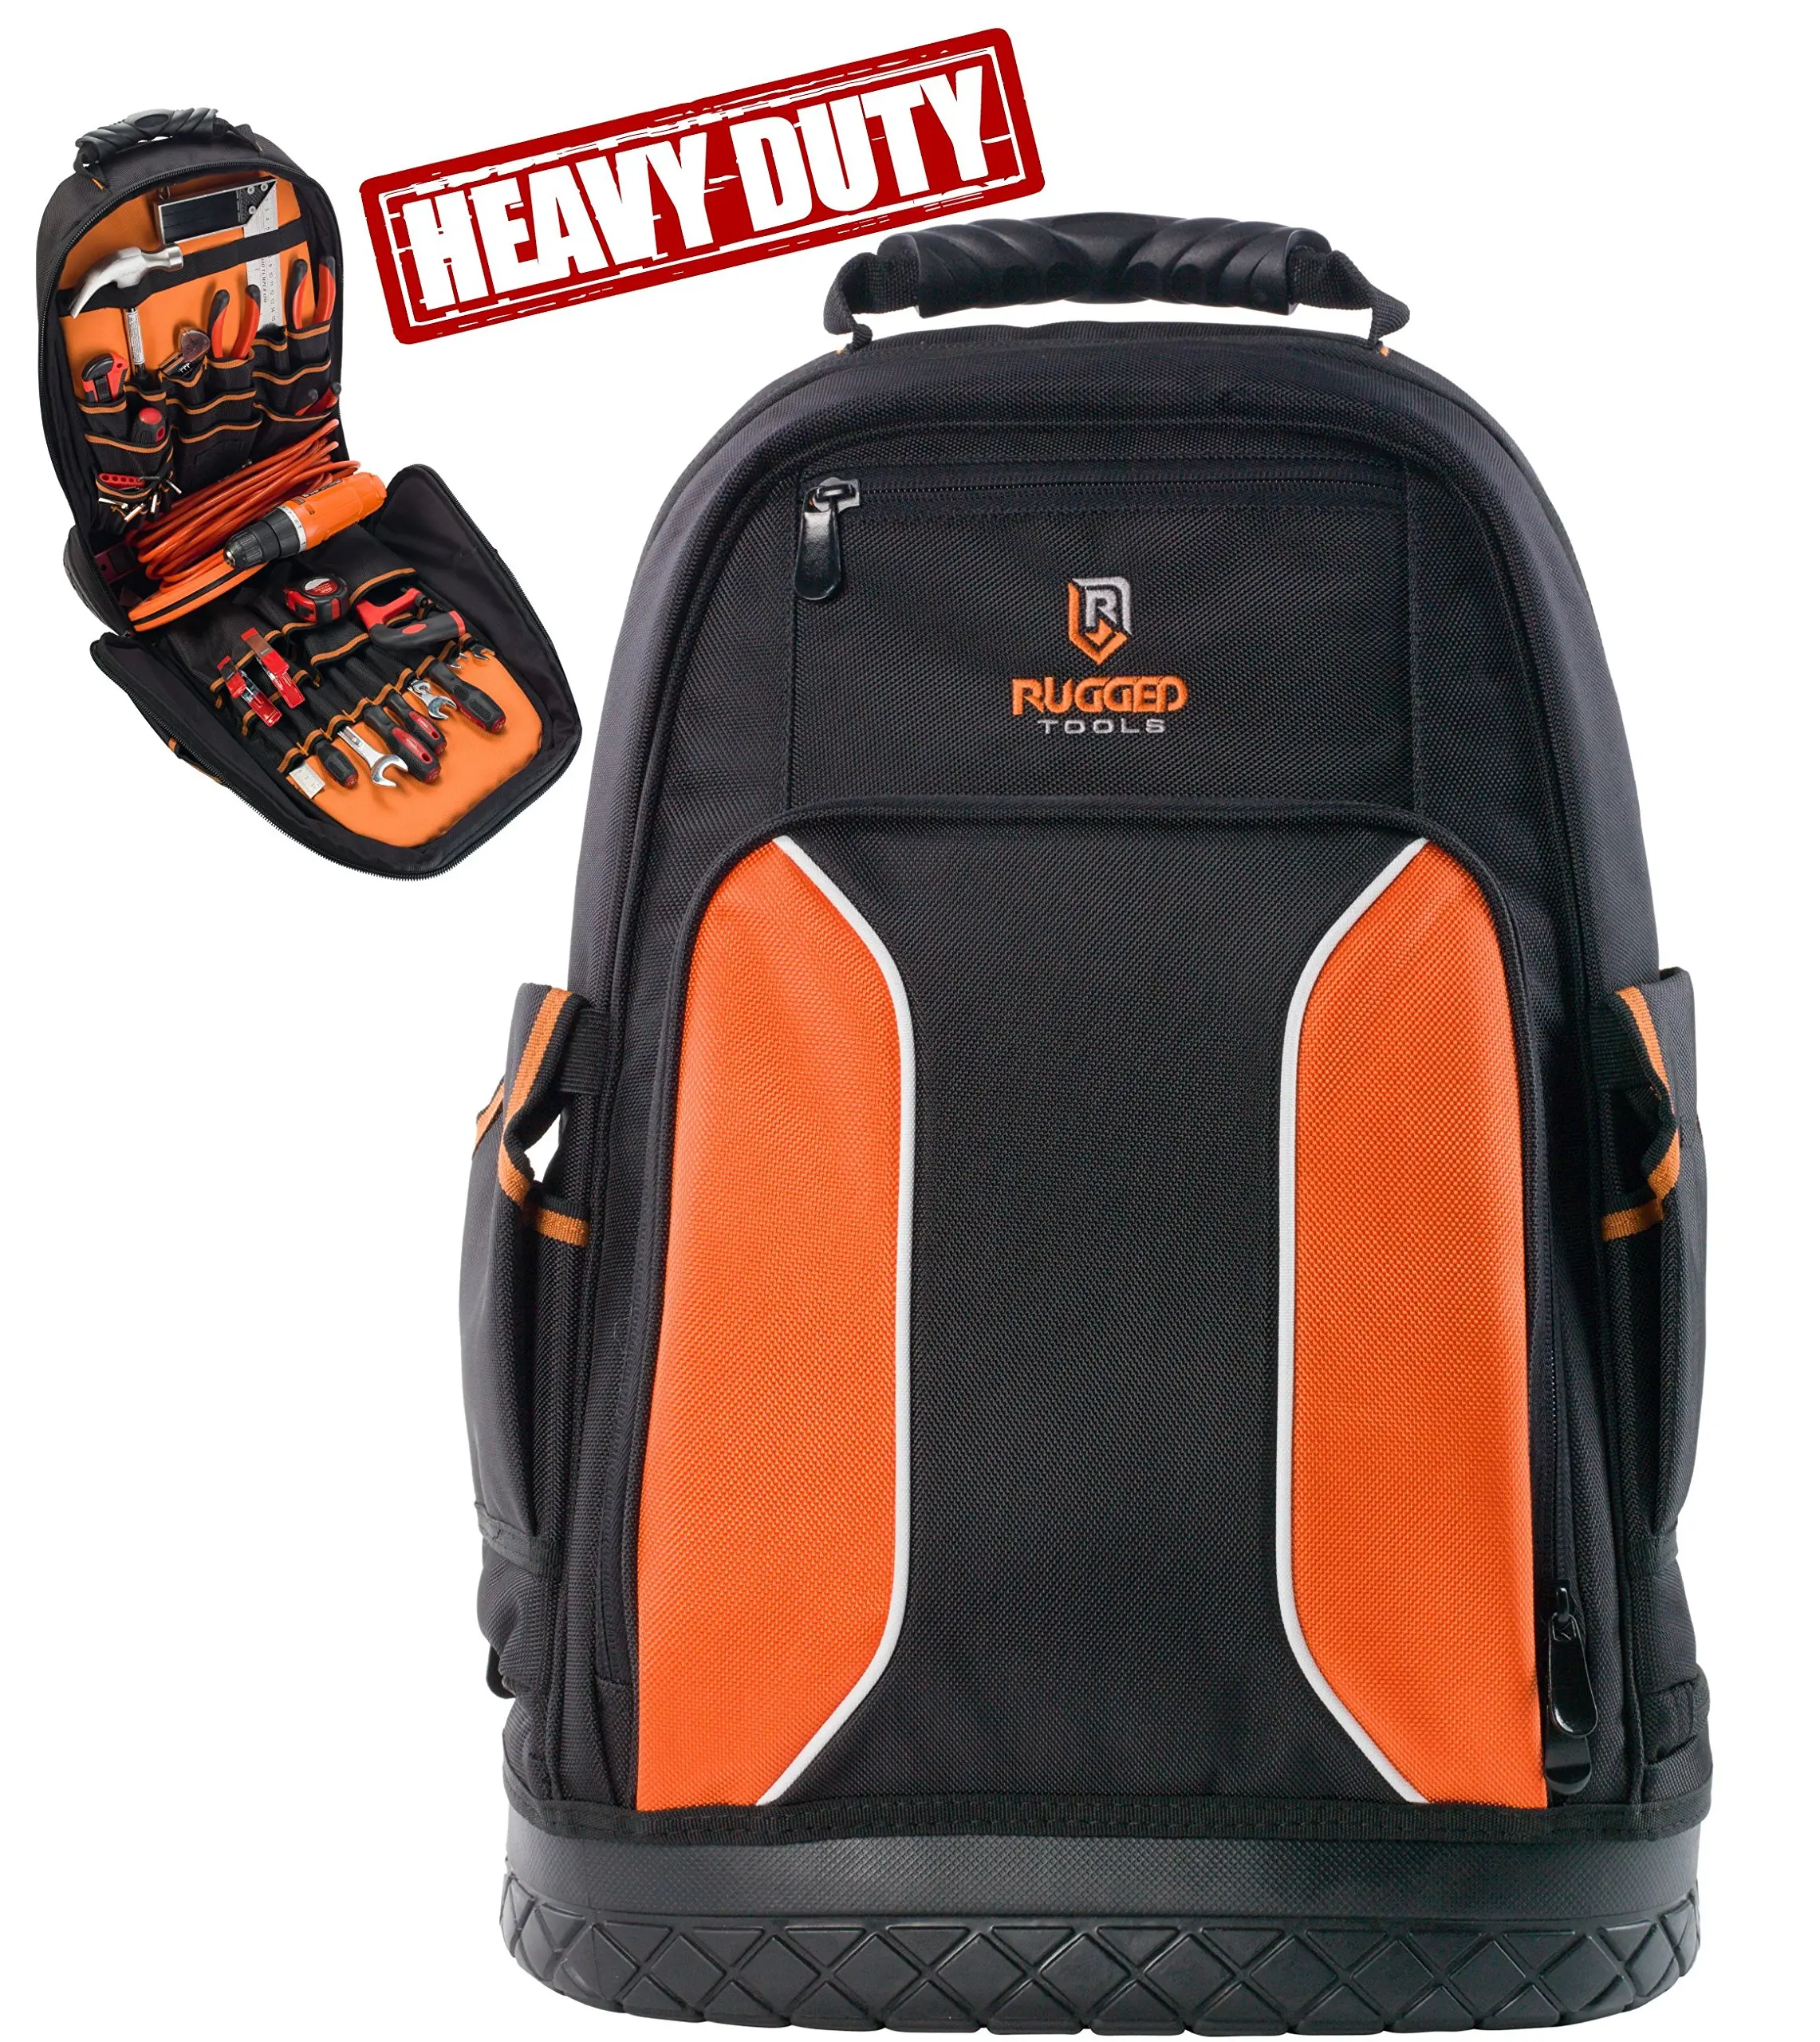 Cheap Awp Tool Backpack, find Awp Tool Backpack deals on line at ...